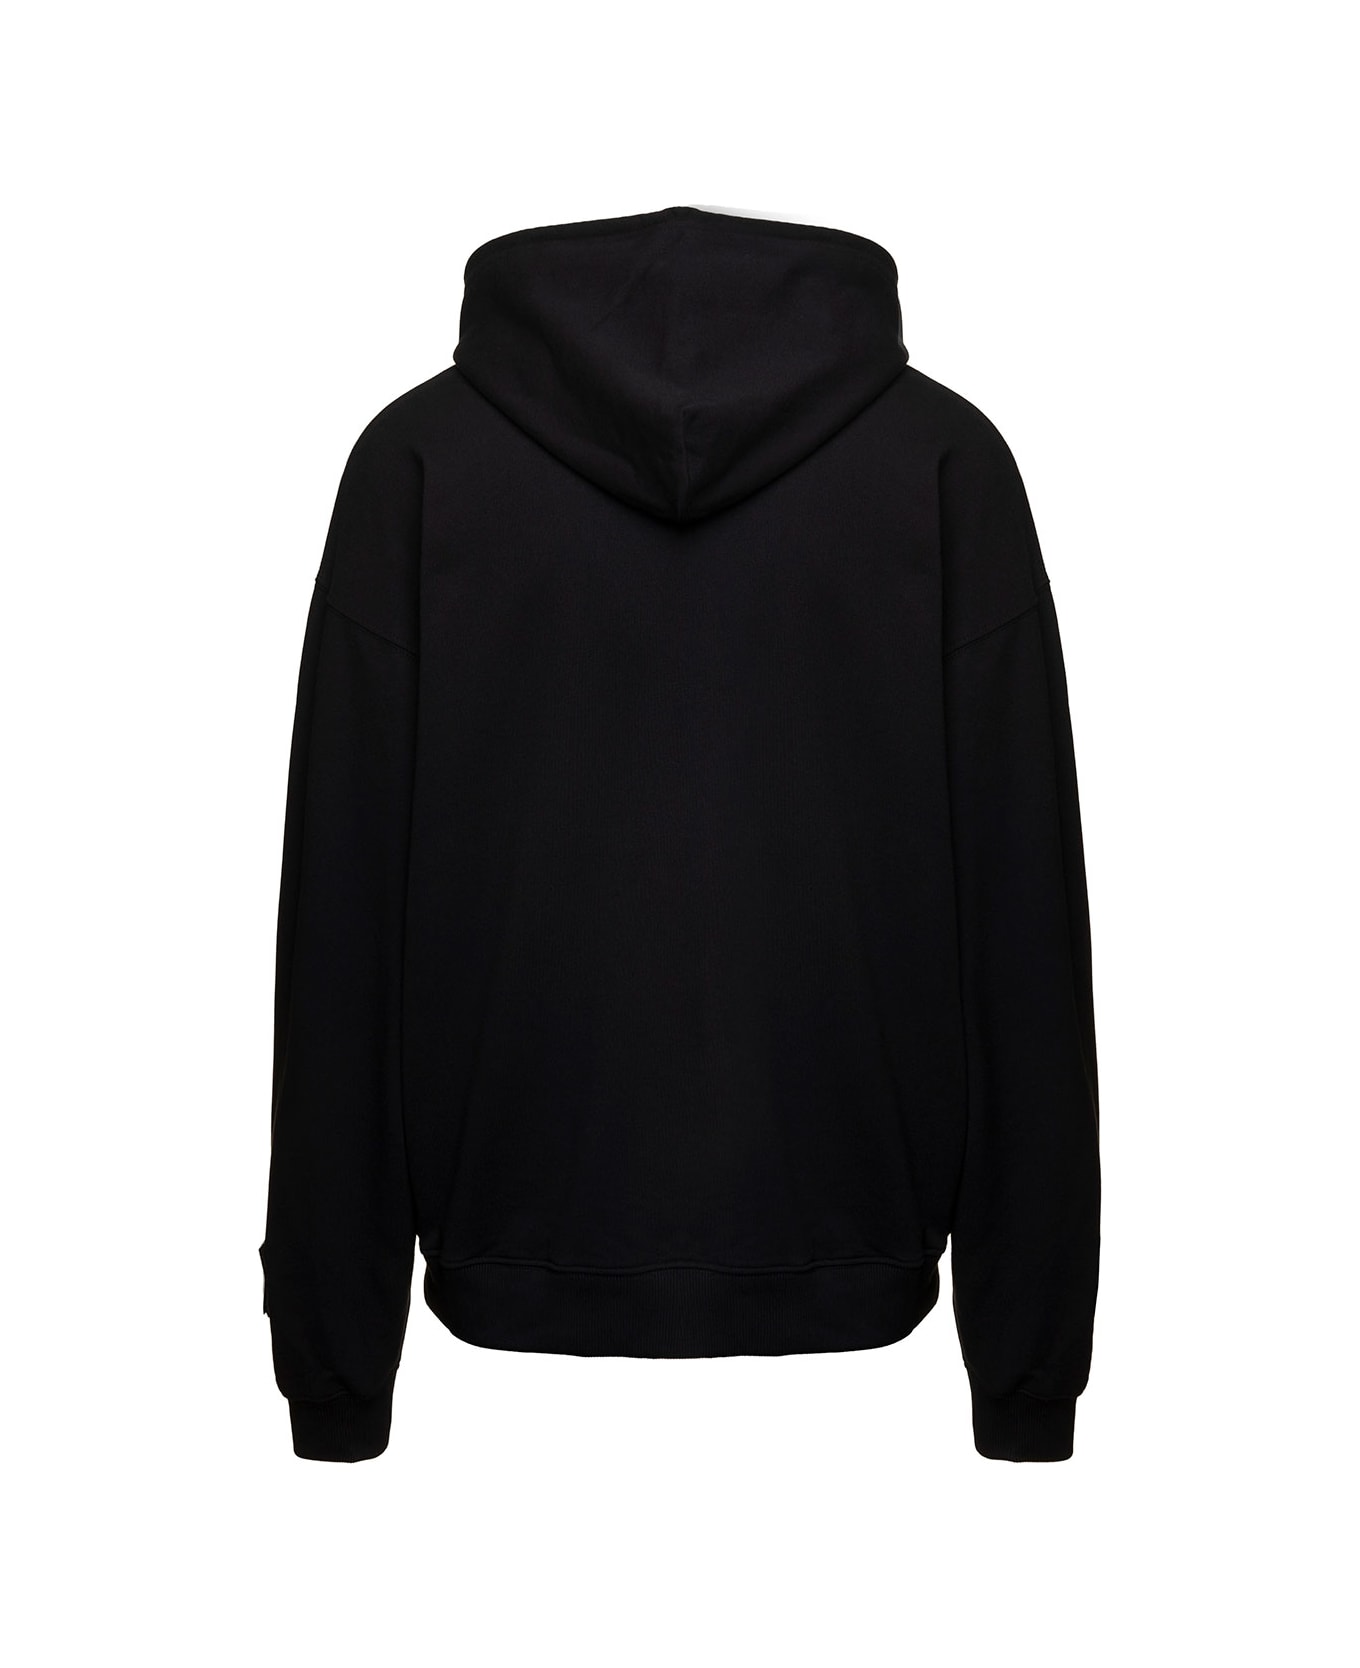 44 Label Group Black Hoodie With Contrasting Logo Embroidery In Cotton Man - Black